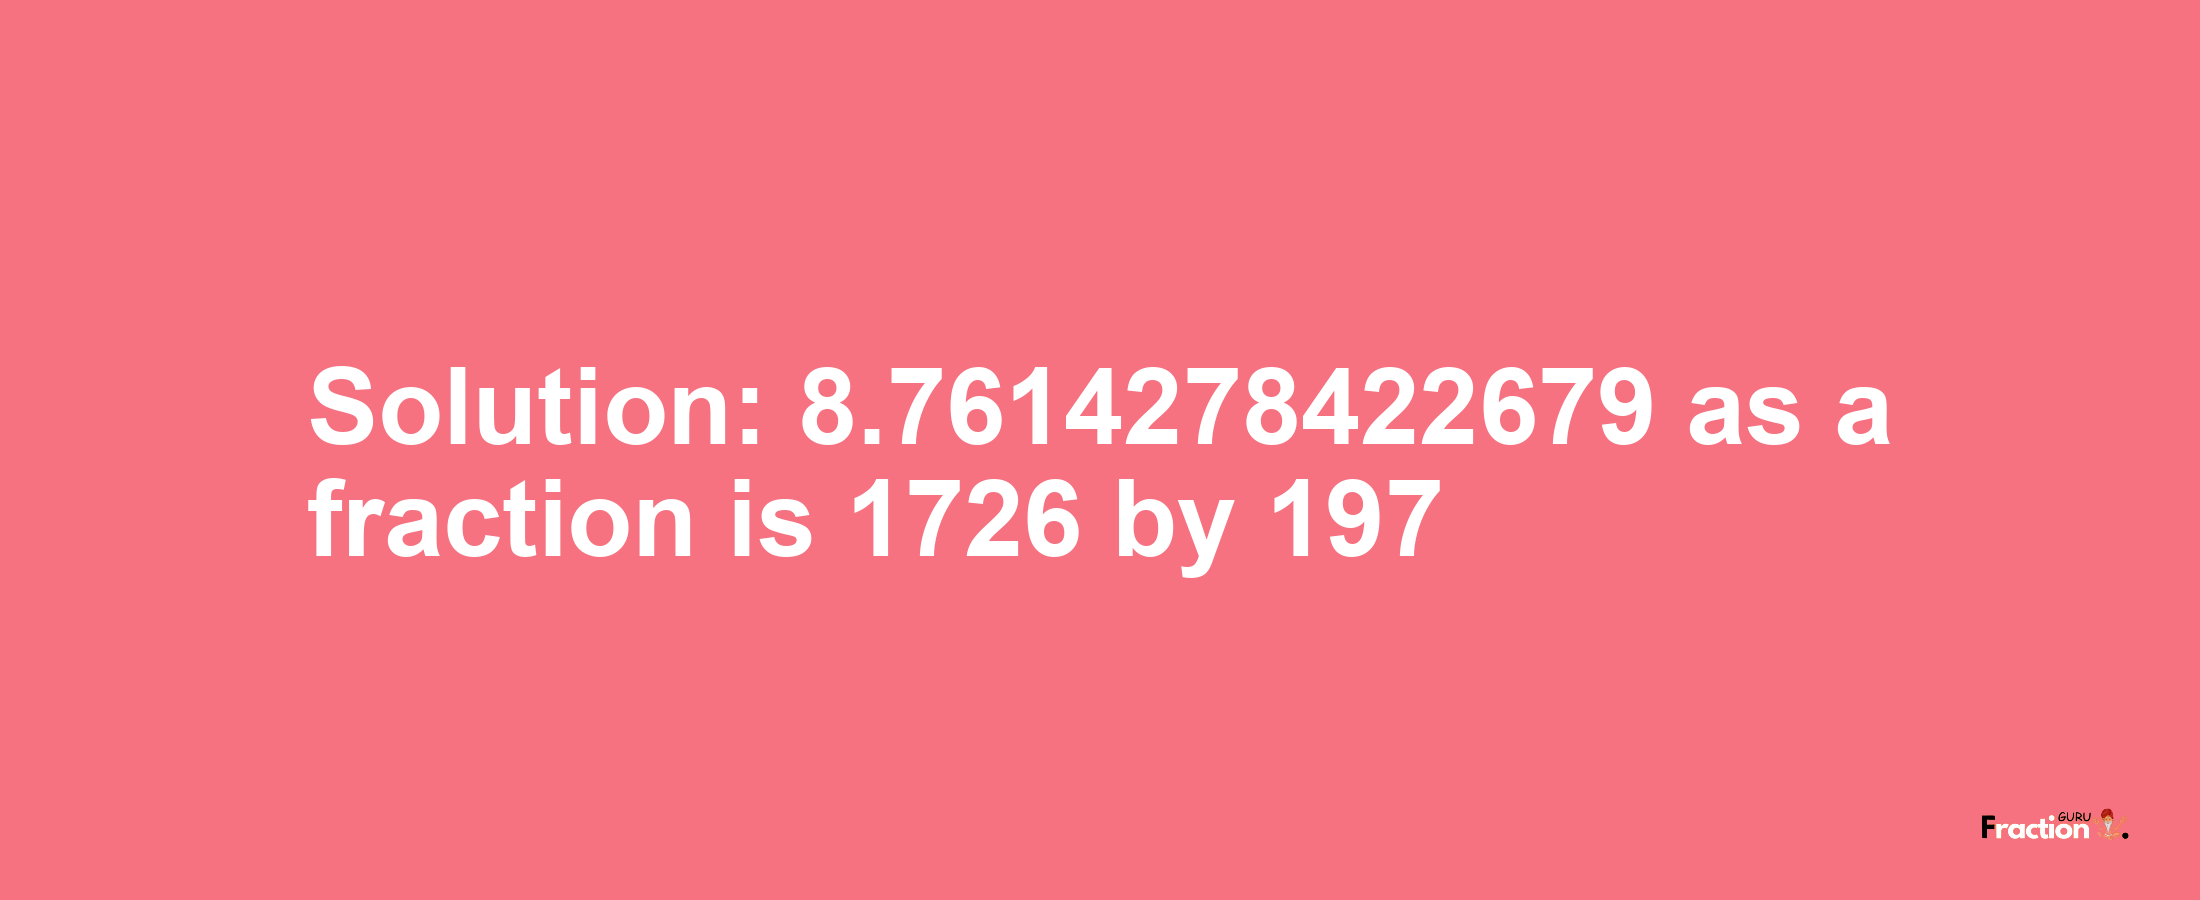 Solution:8.7614278422679 as a fraction is 1726/197